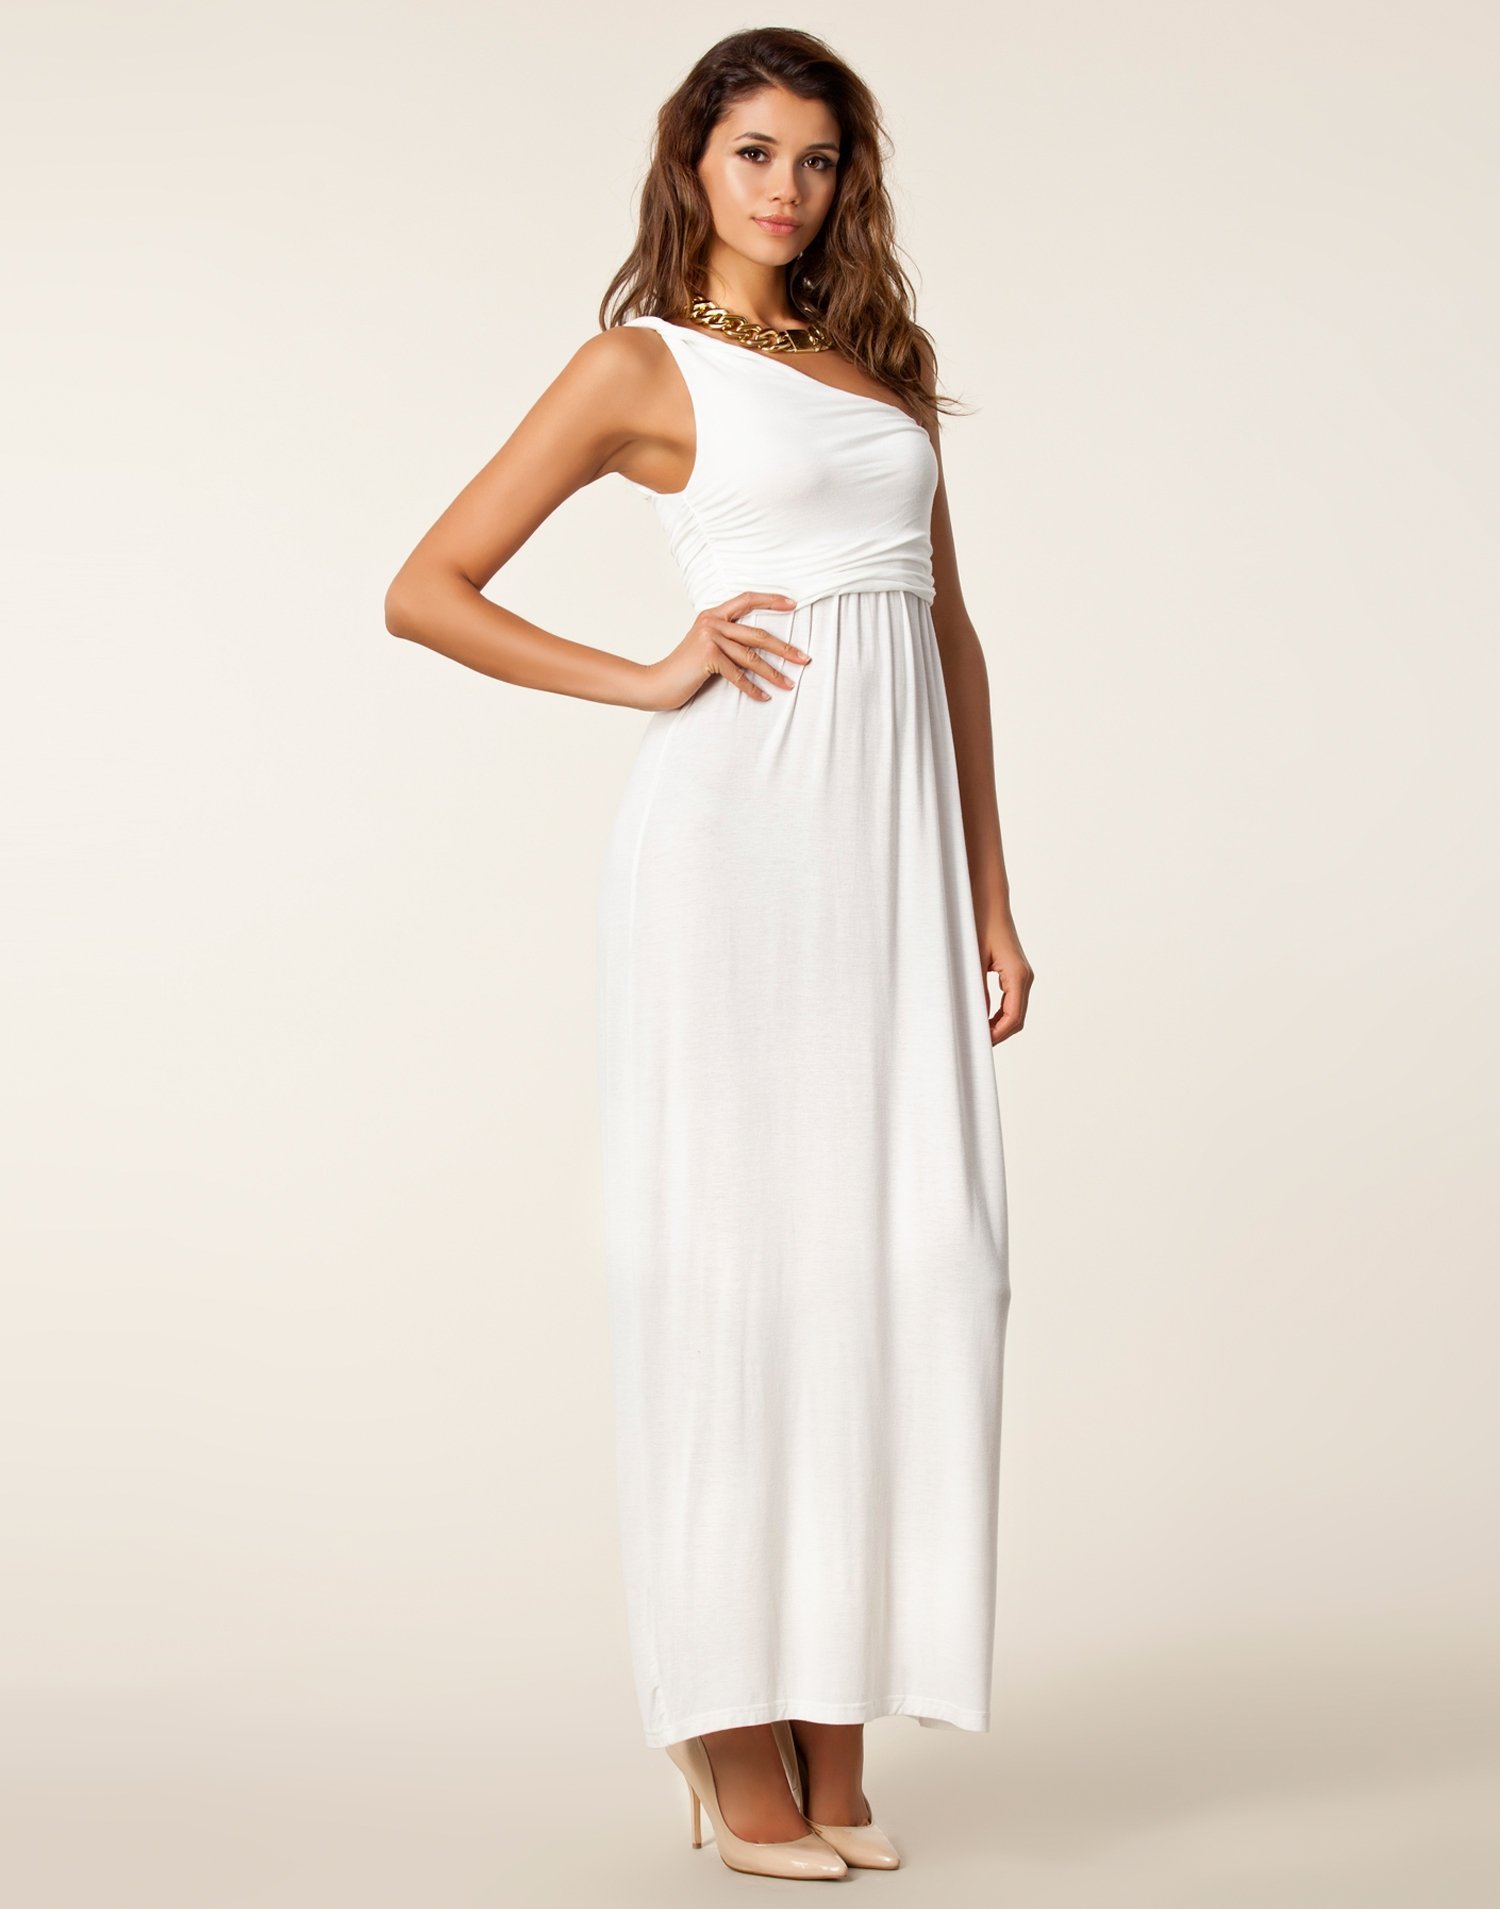 Crown Dress - Nly Trend - White - Party Dresses - Clothing - Women ...